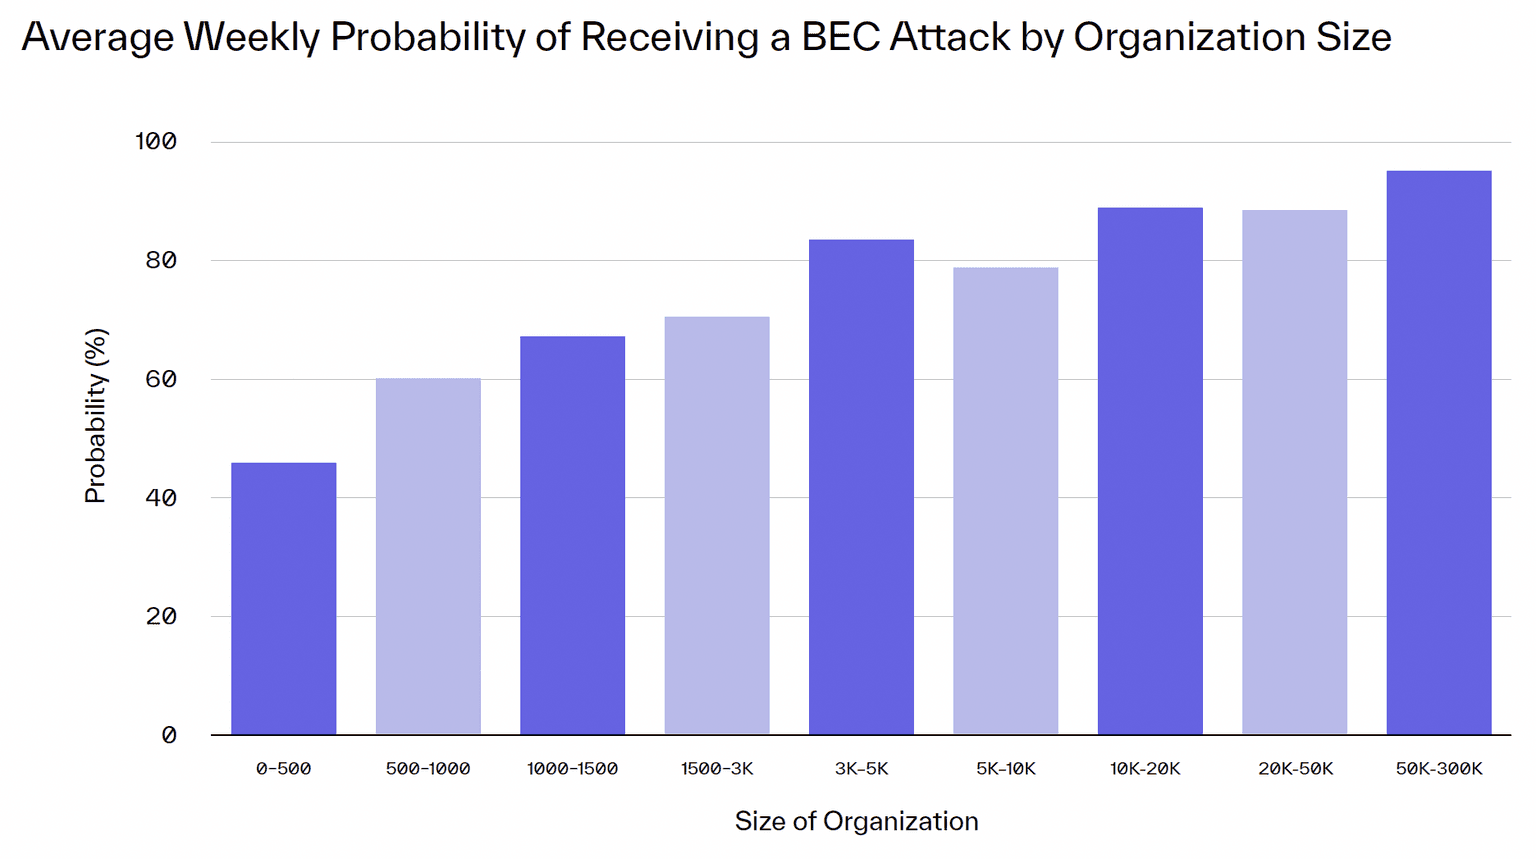 Average Weekly Probability of Receiving a BEC Attack by Org Size